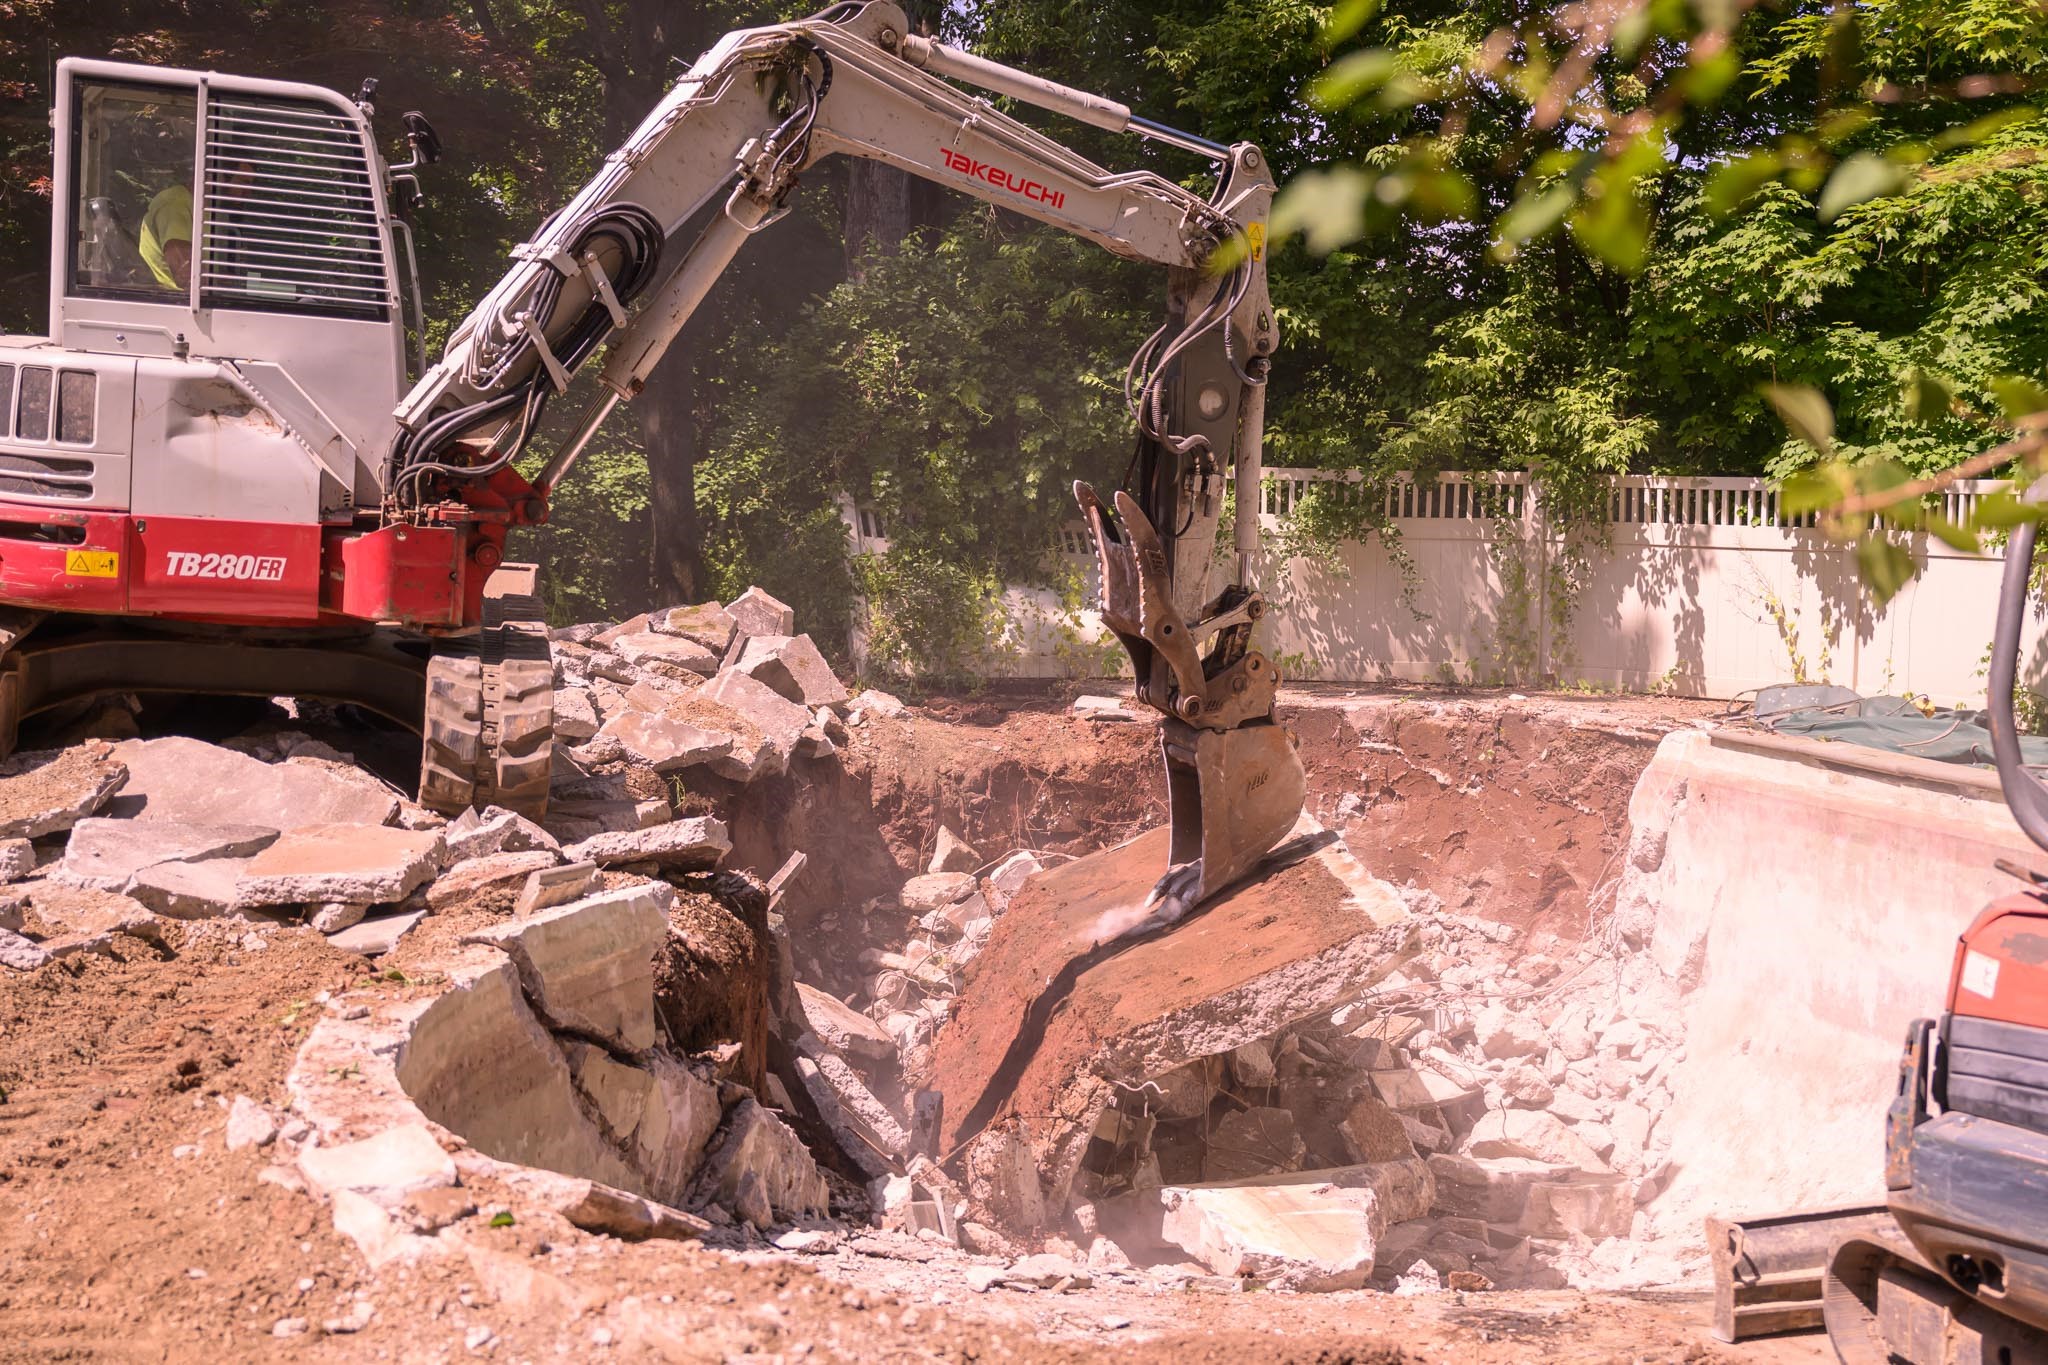 A red and white excavator clearing rubble at a construction site.